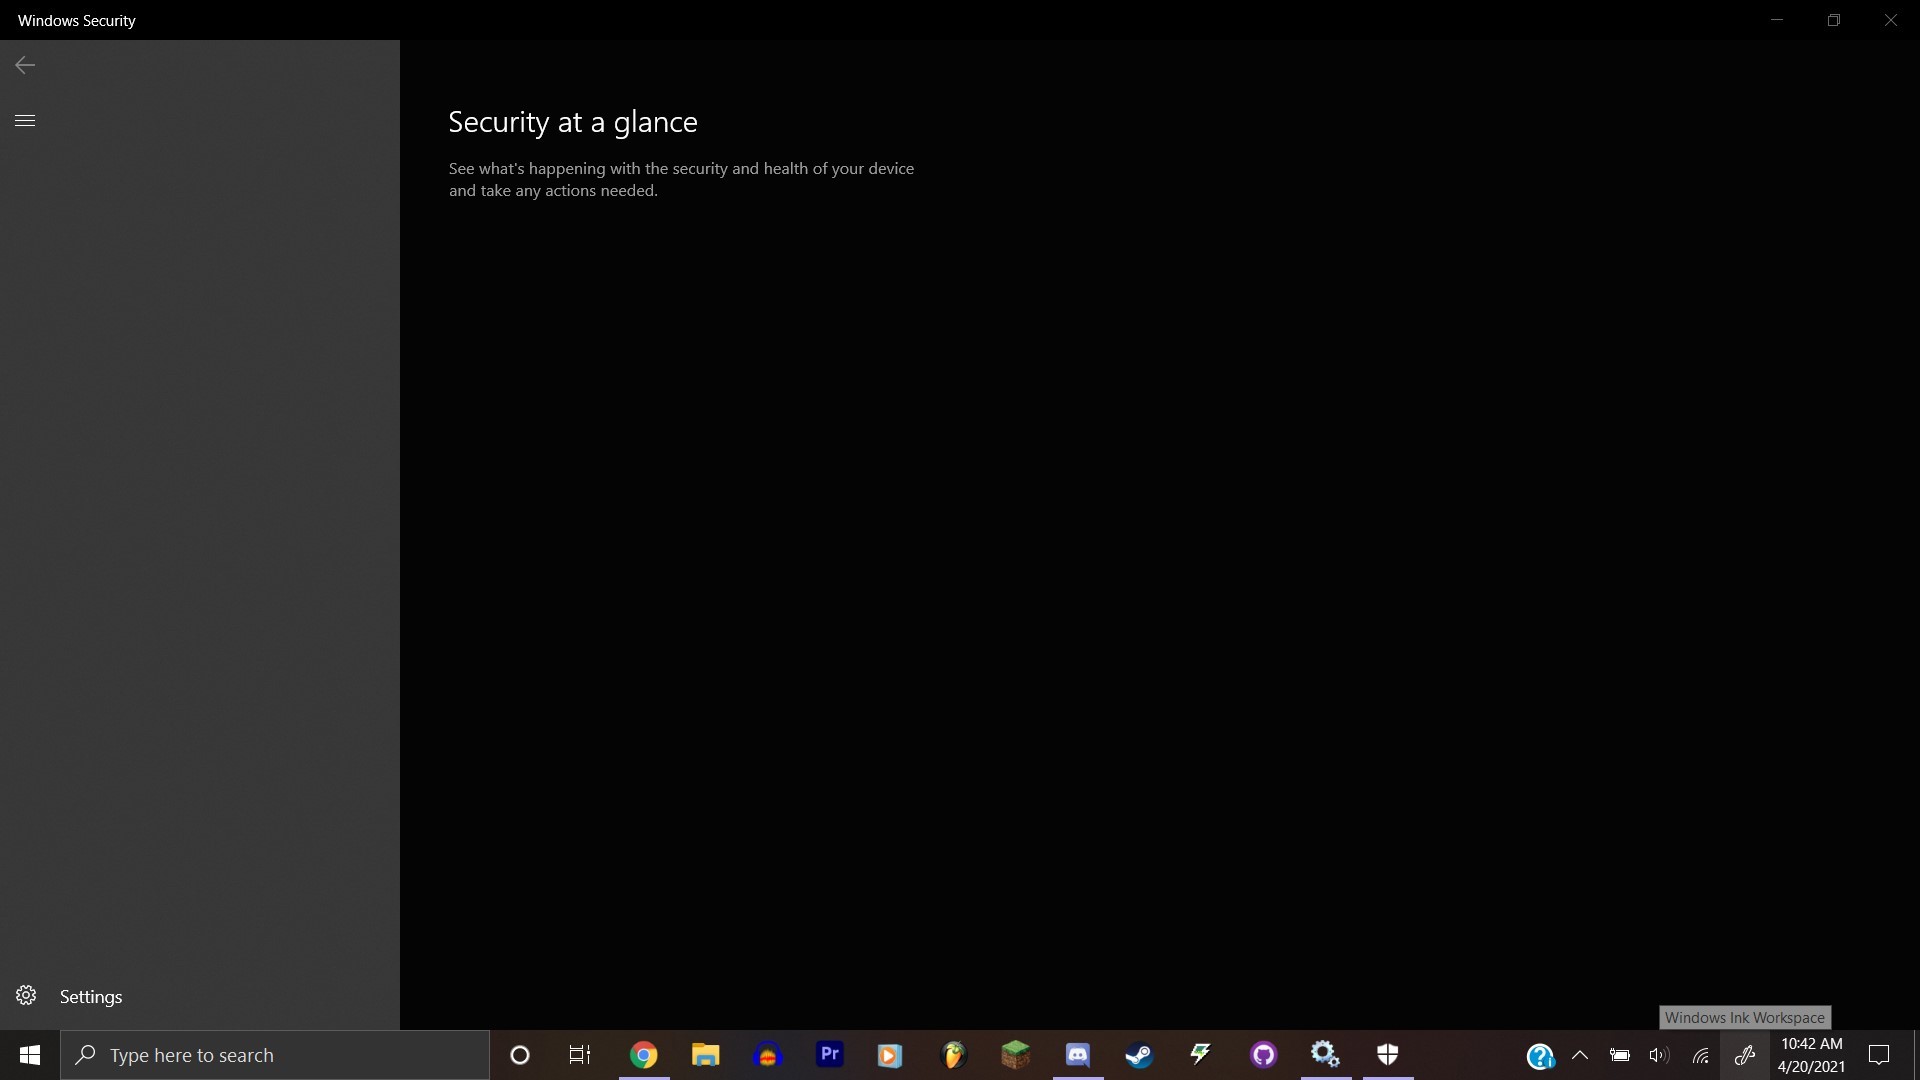 Windows defender not working/can't download from anything due to there being no protection 16f61275-cb64-4d23-b135-8d1623e81c94?upload=true.jpg